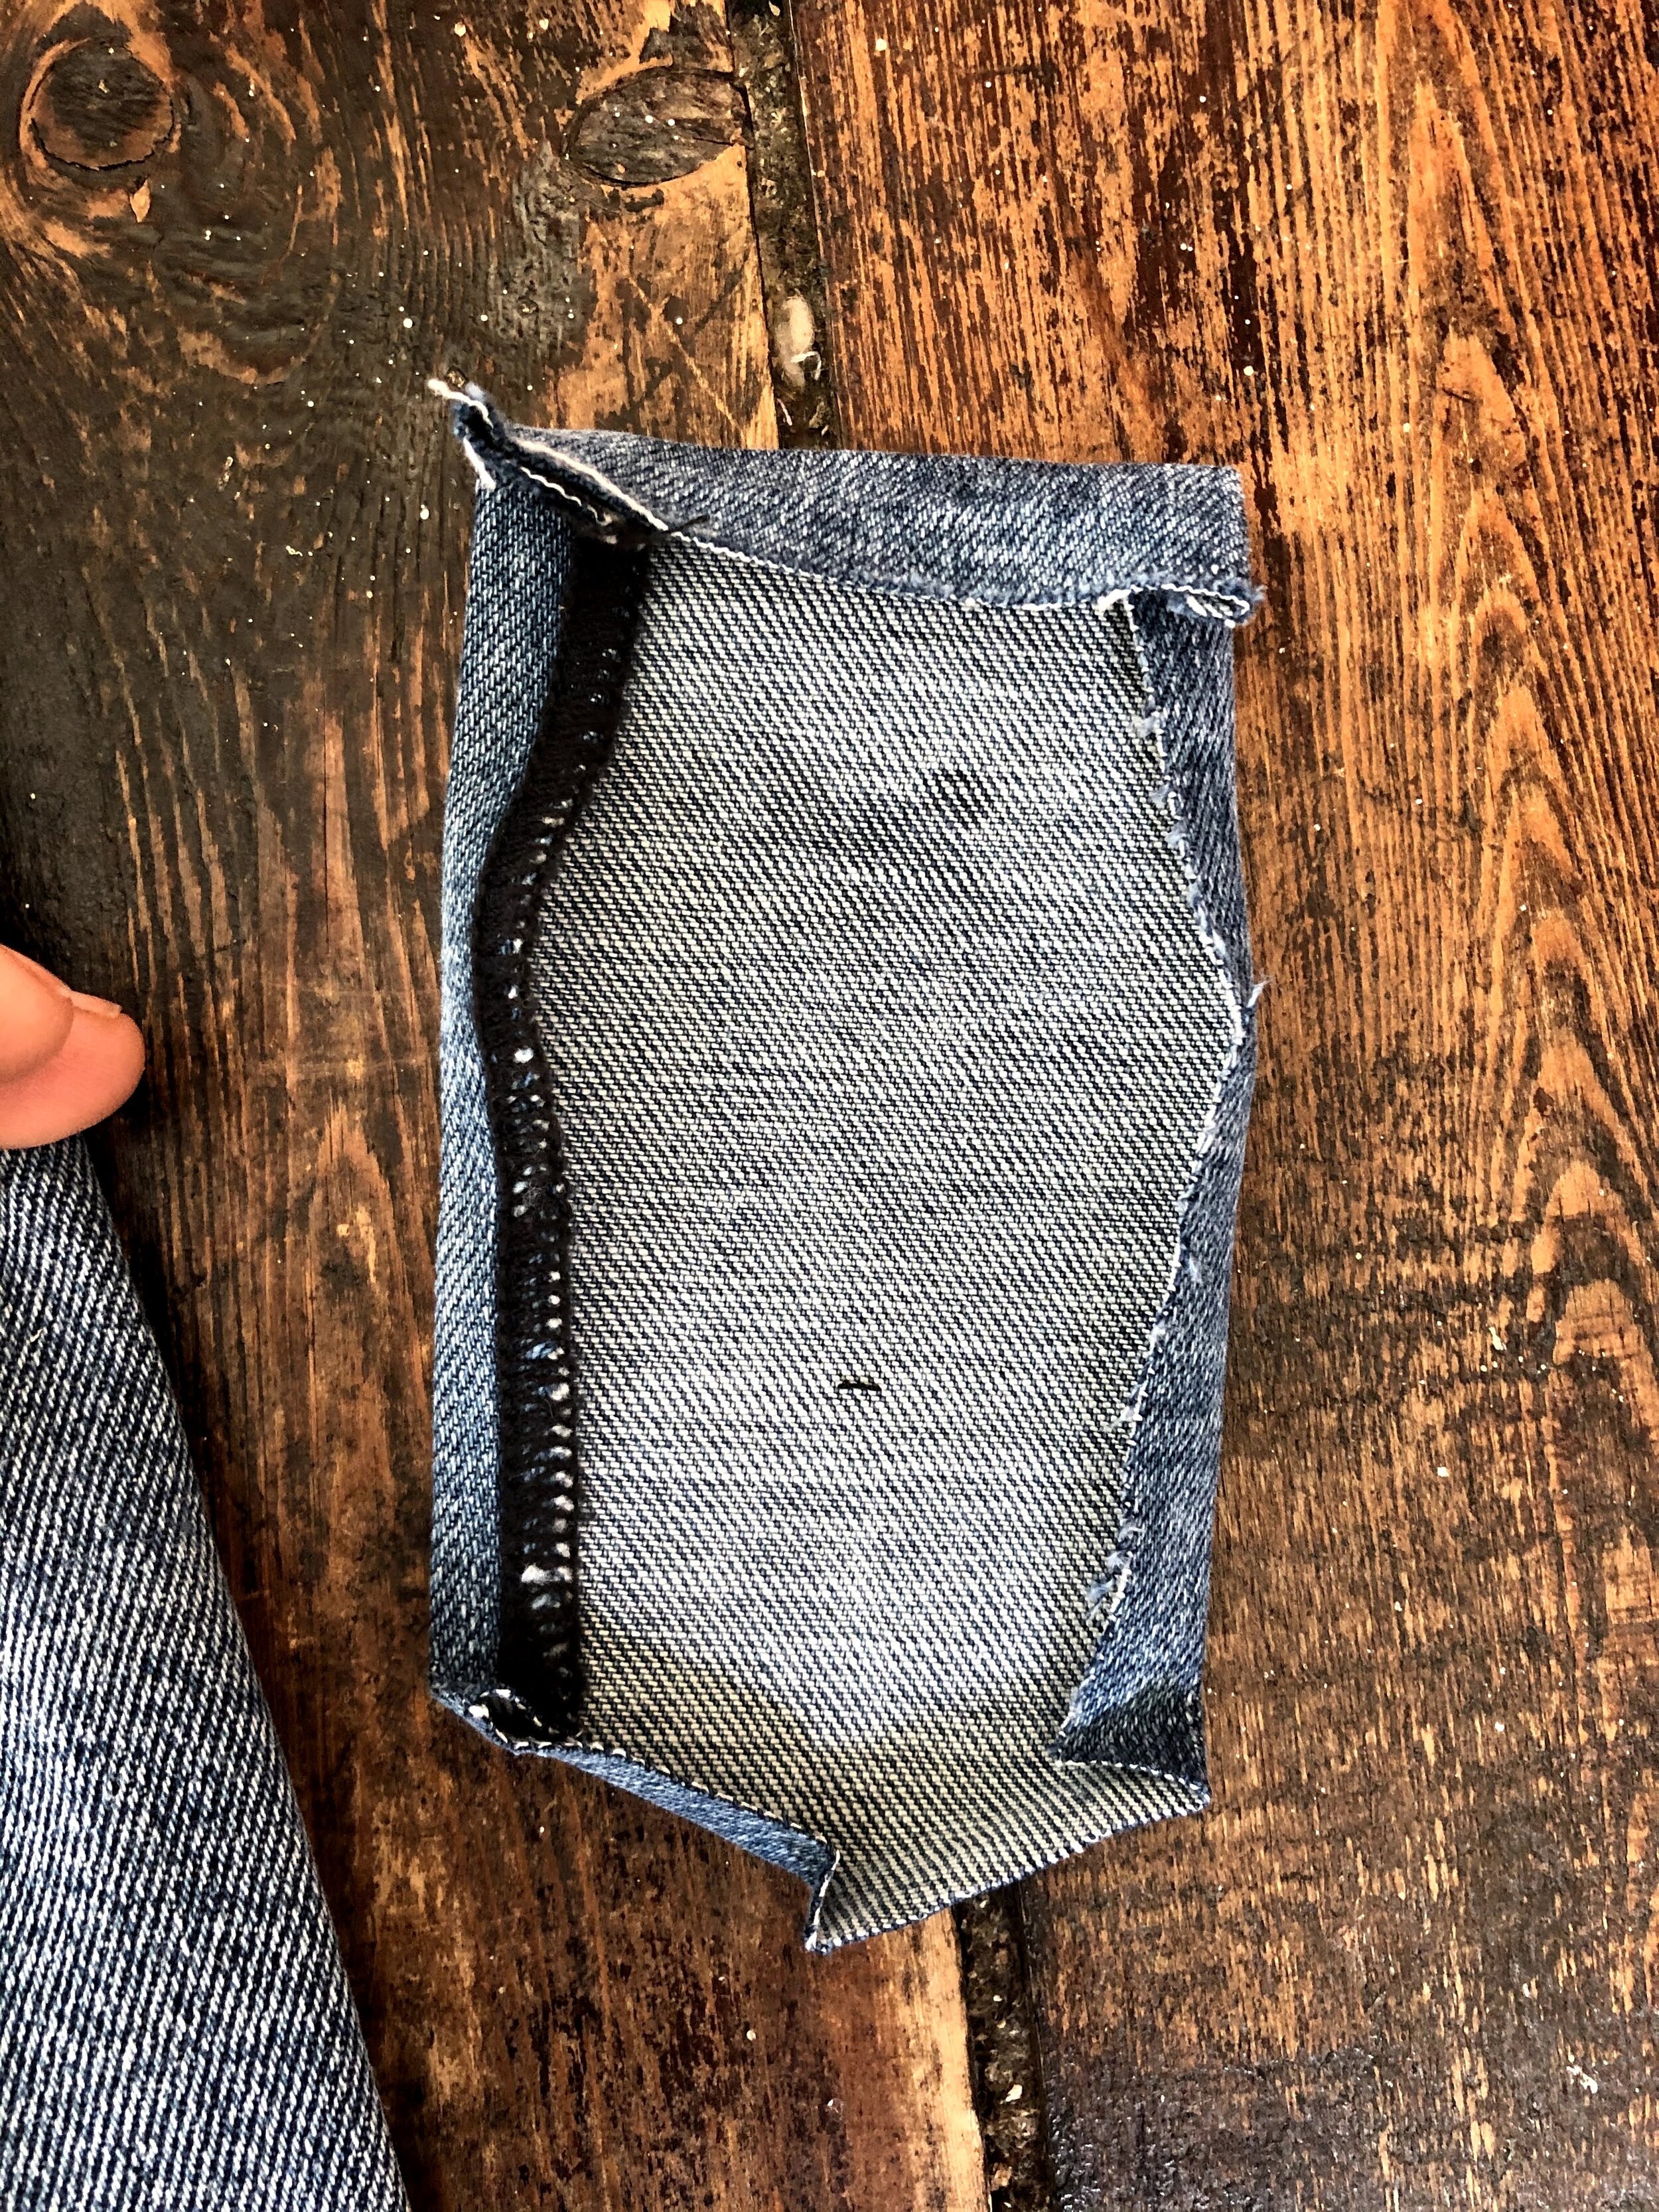 How to repair a ripped jean — Abigail Wastie